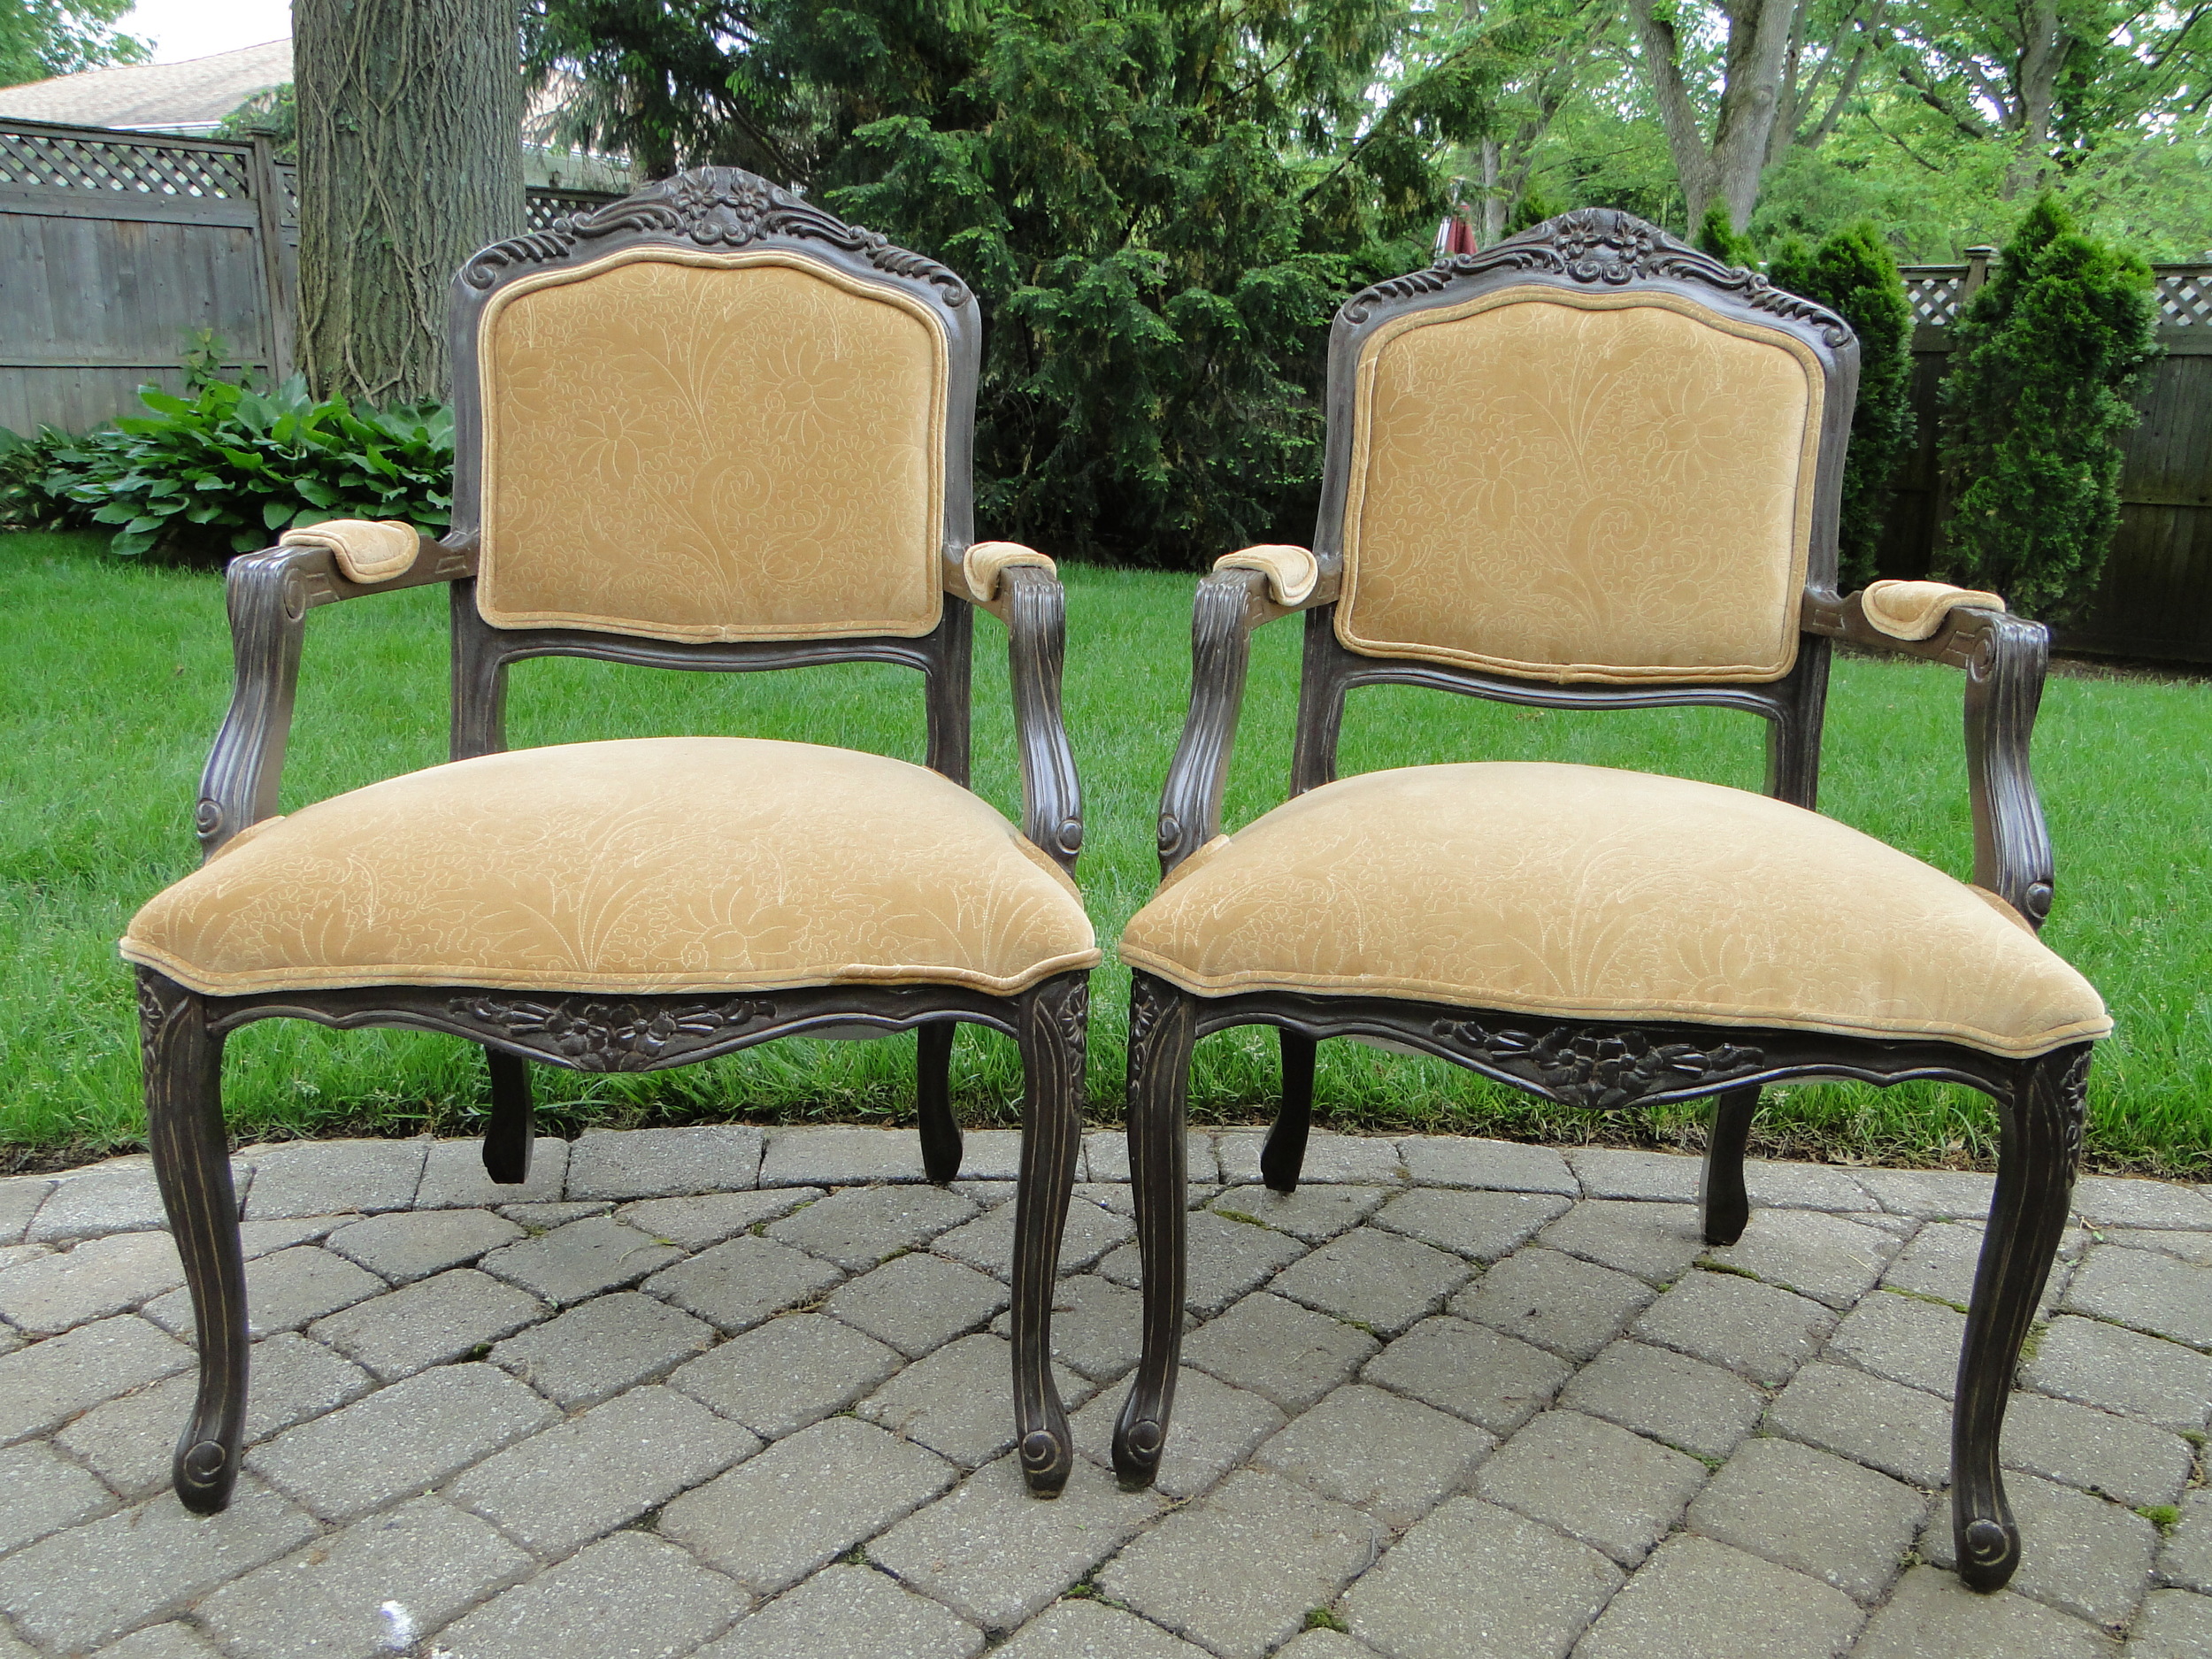 Pair of chairs complete with new fabric and finish